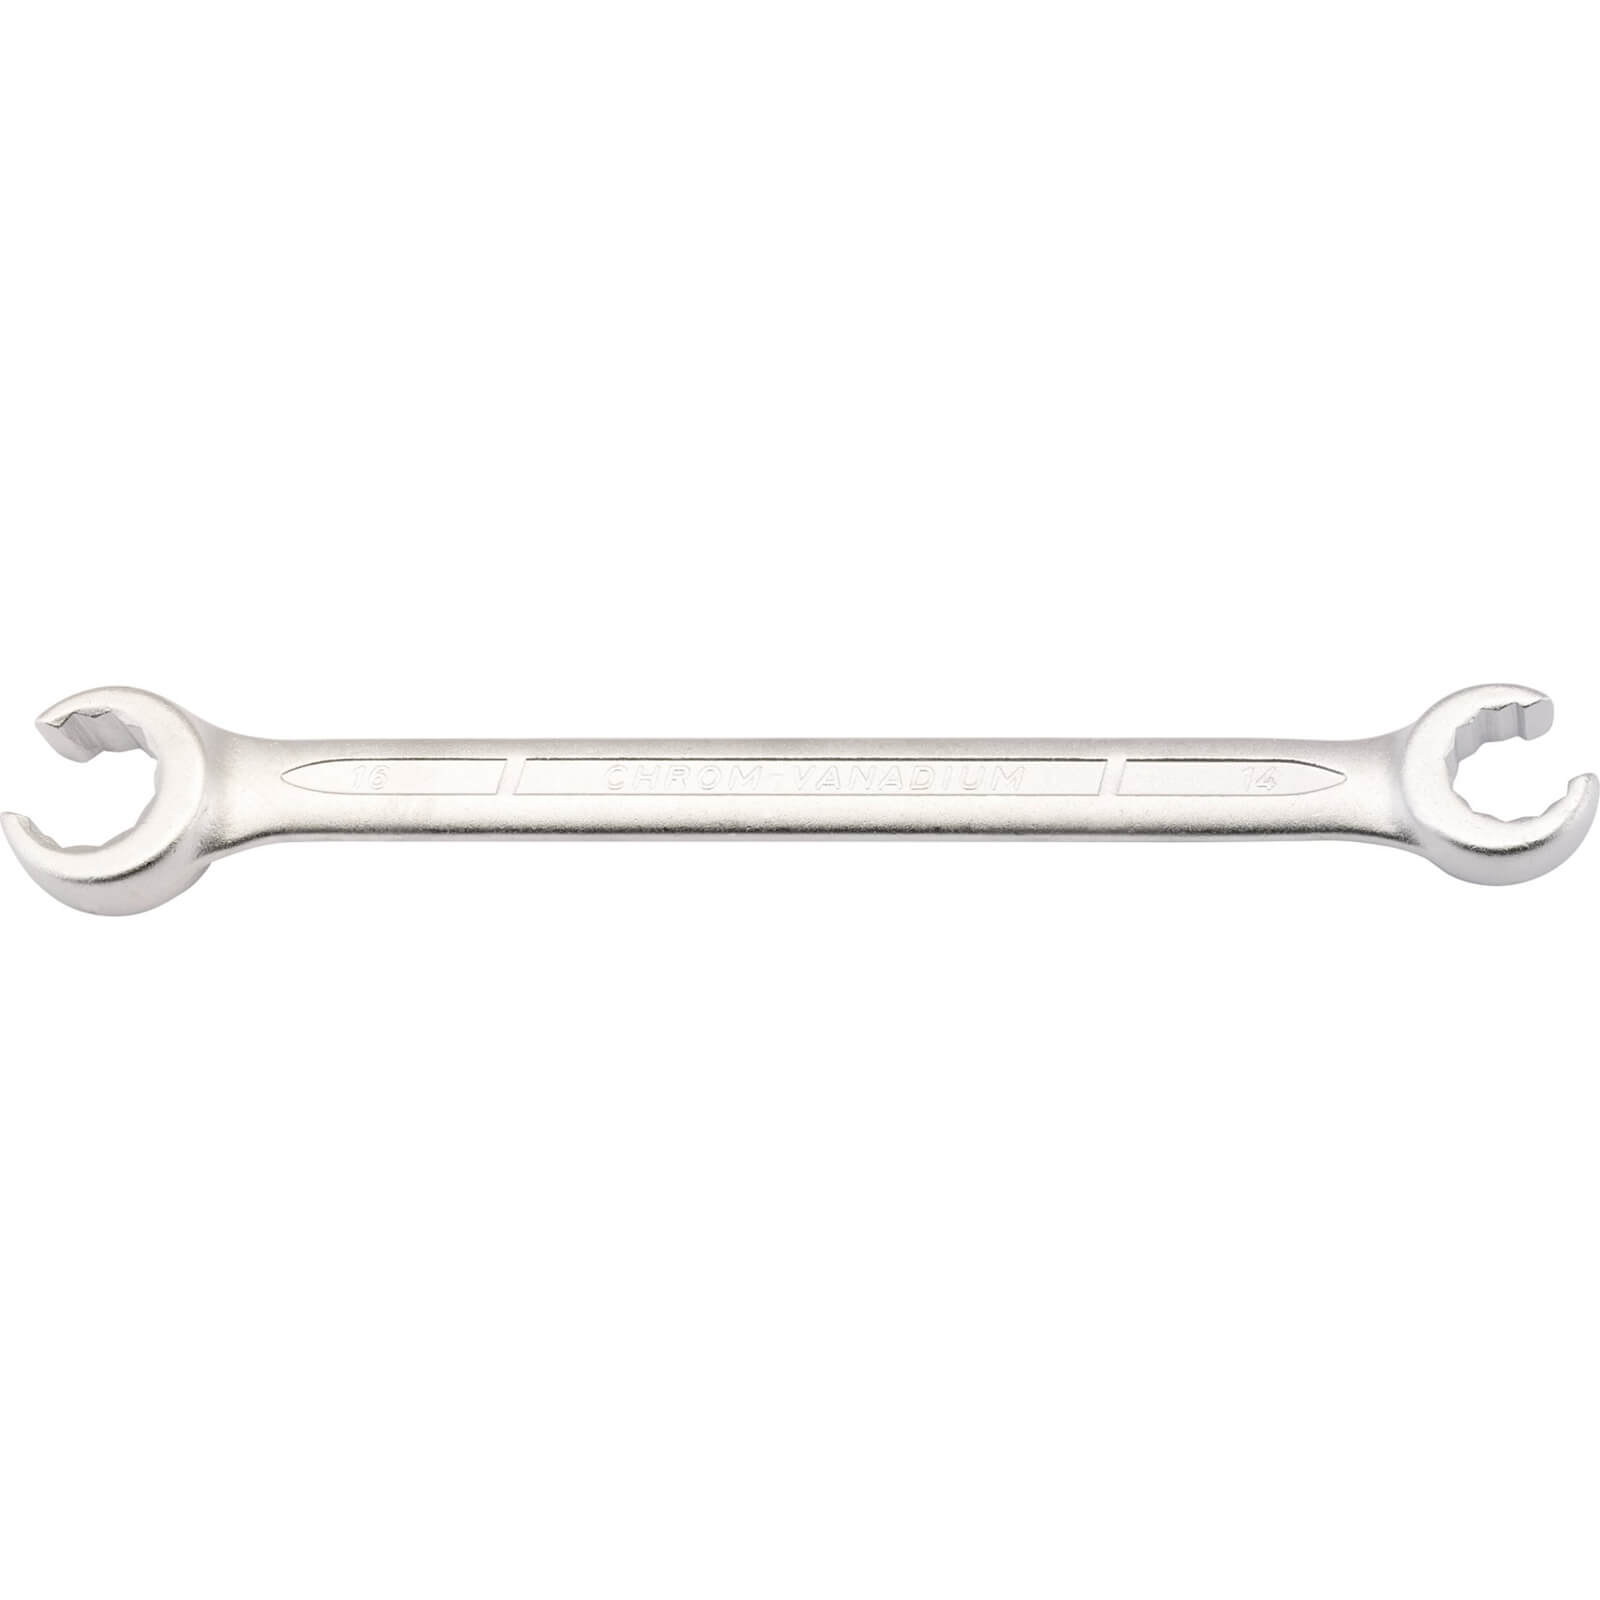 Image of Elora Flare Nut Spanner 14mm x 16mm